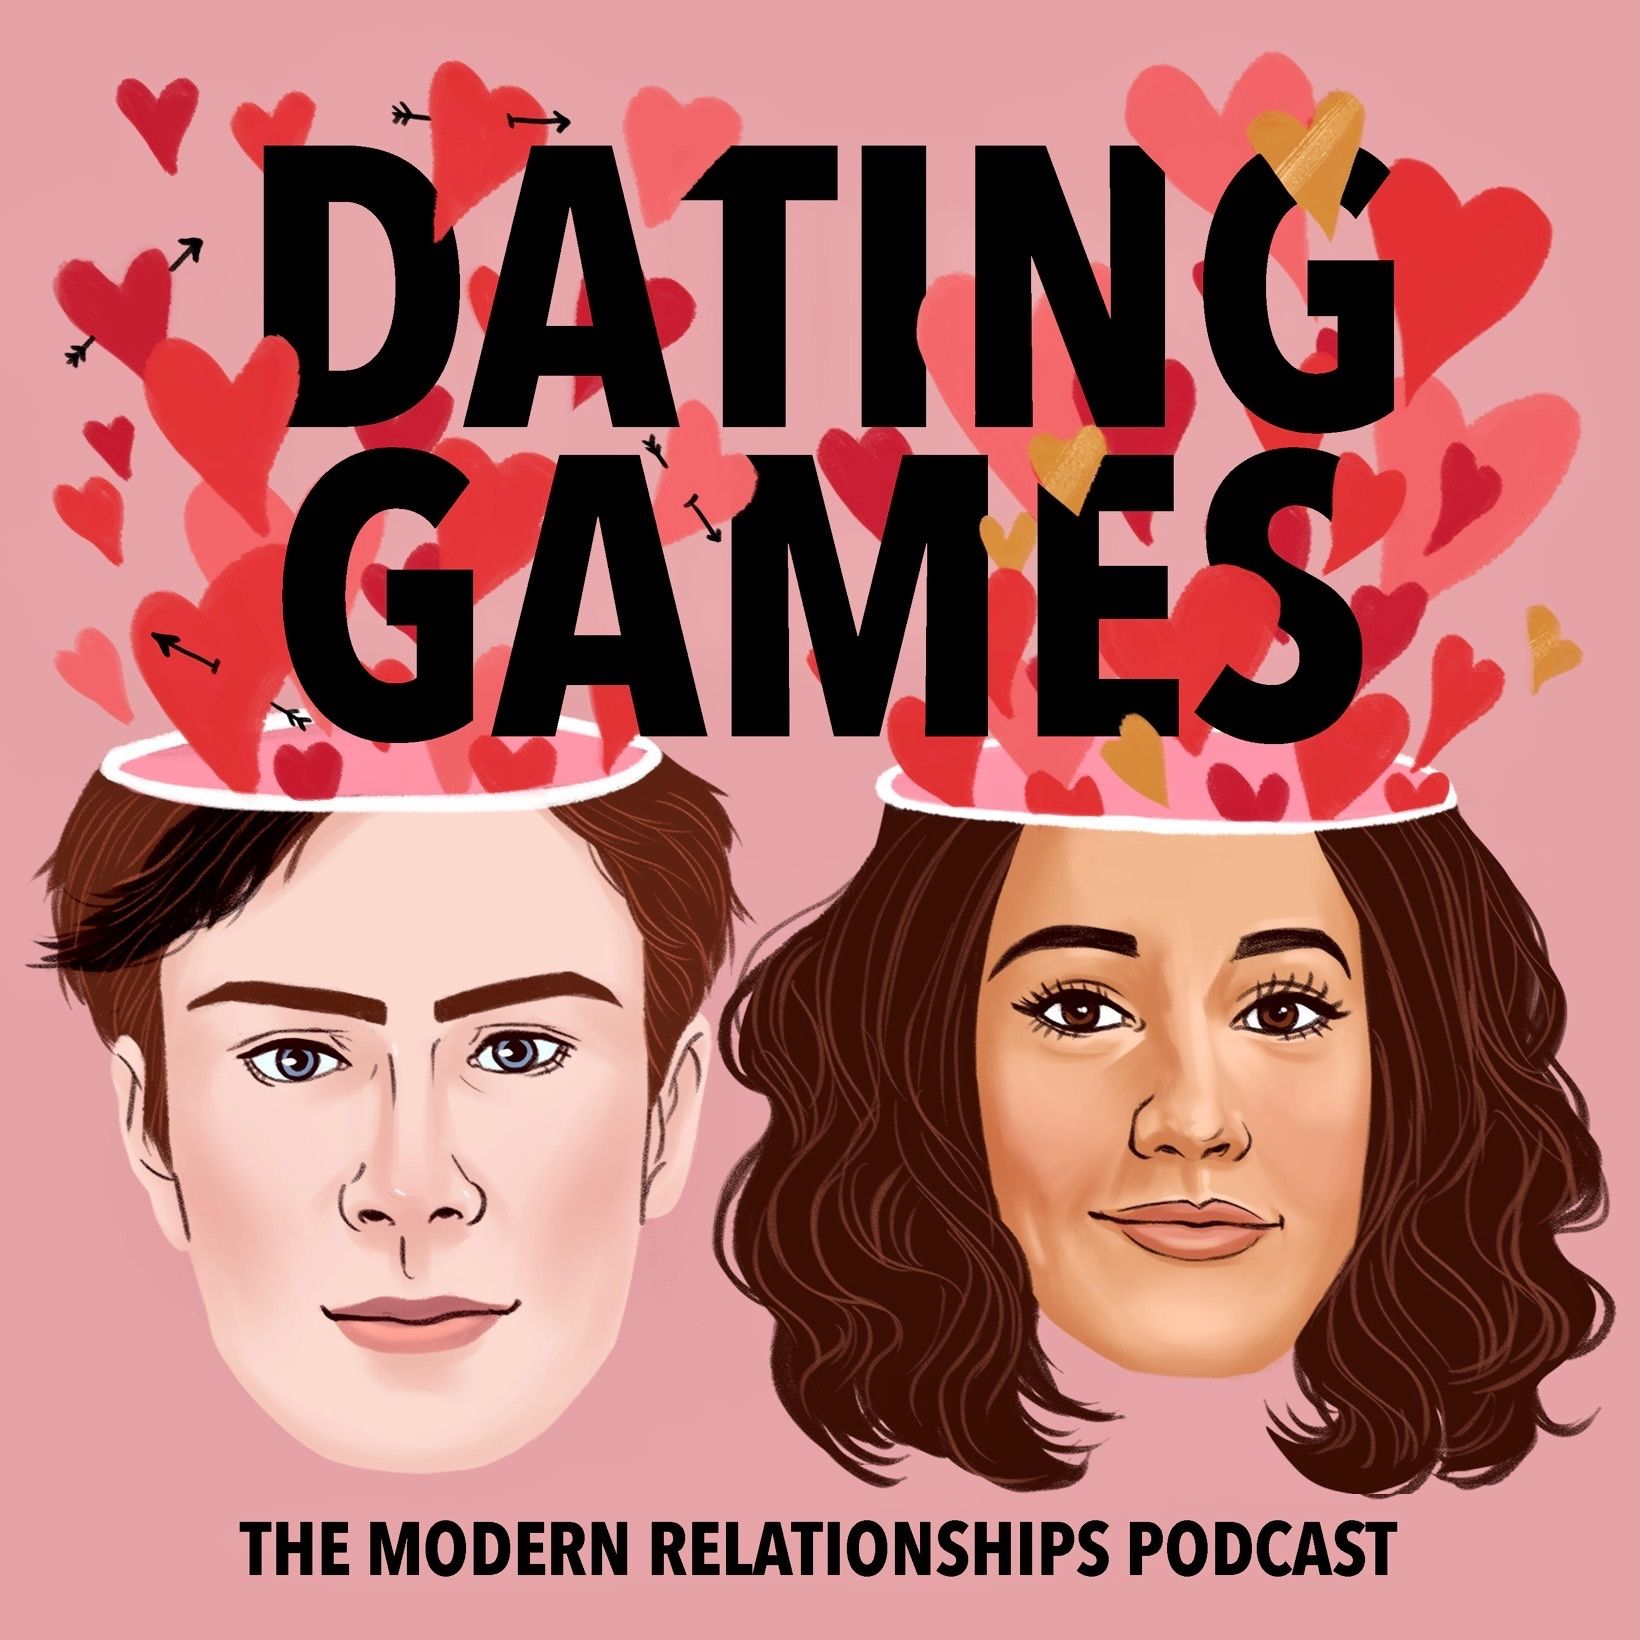 S4 Ep7: Speed dating insights with Sam & Eoin ⏱️